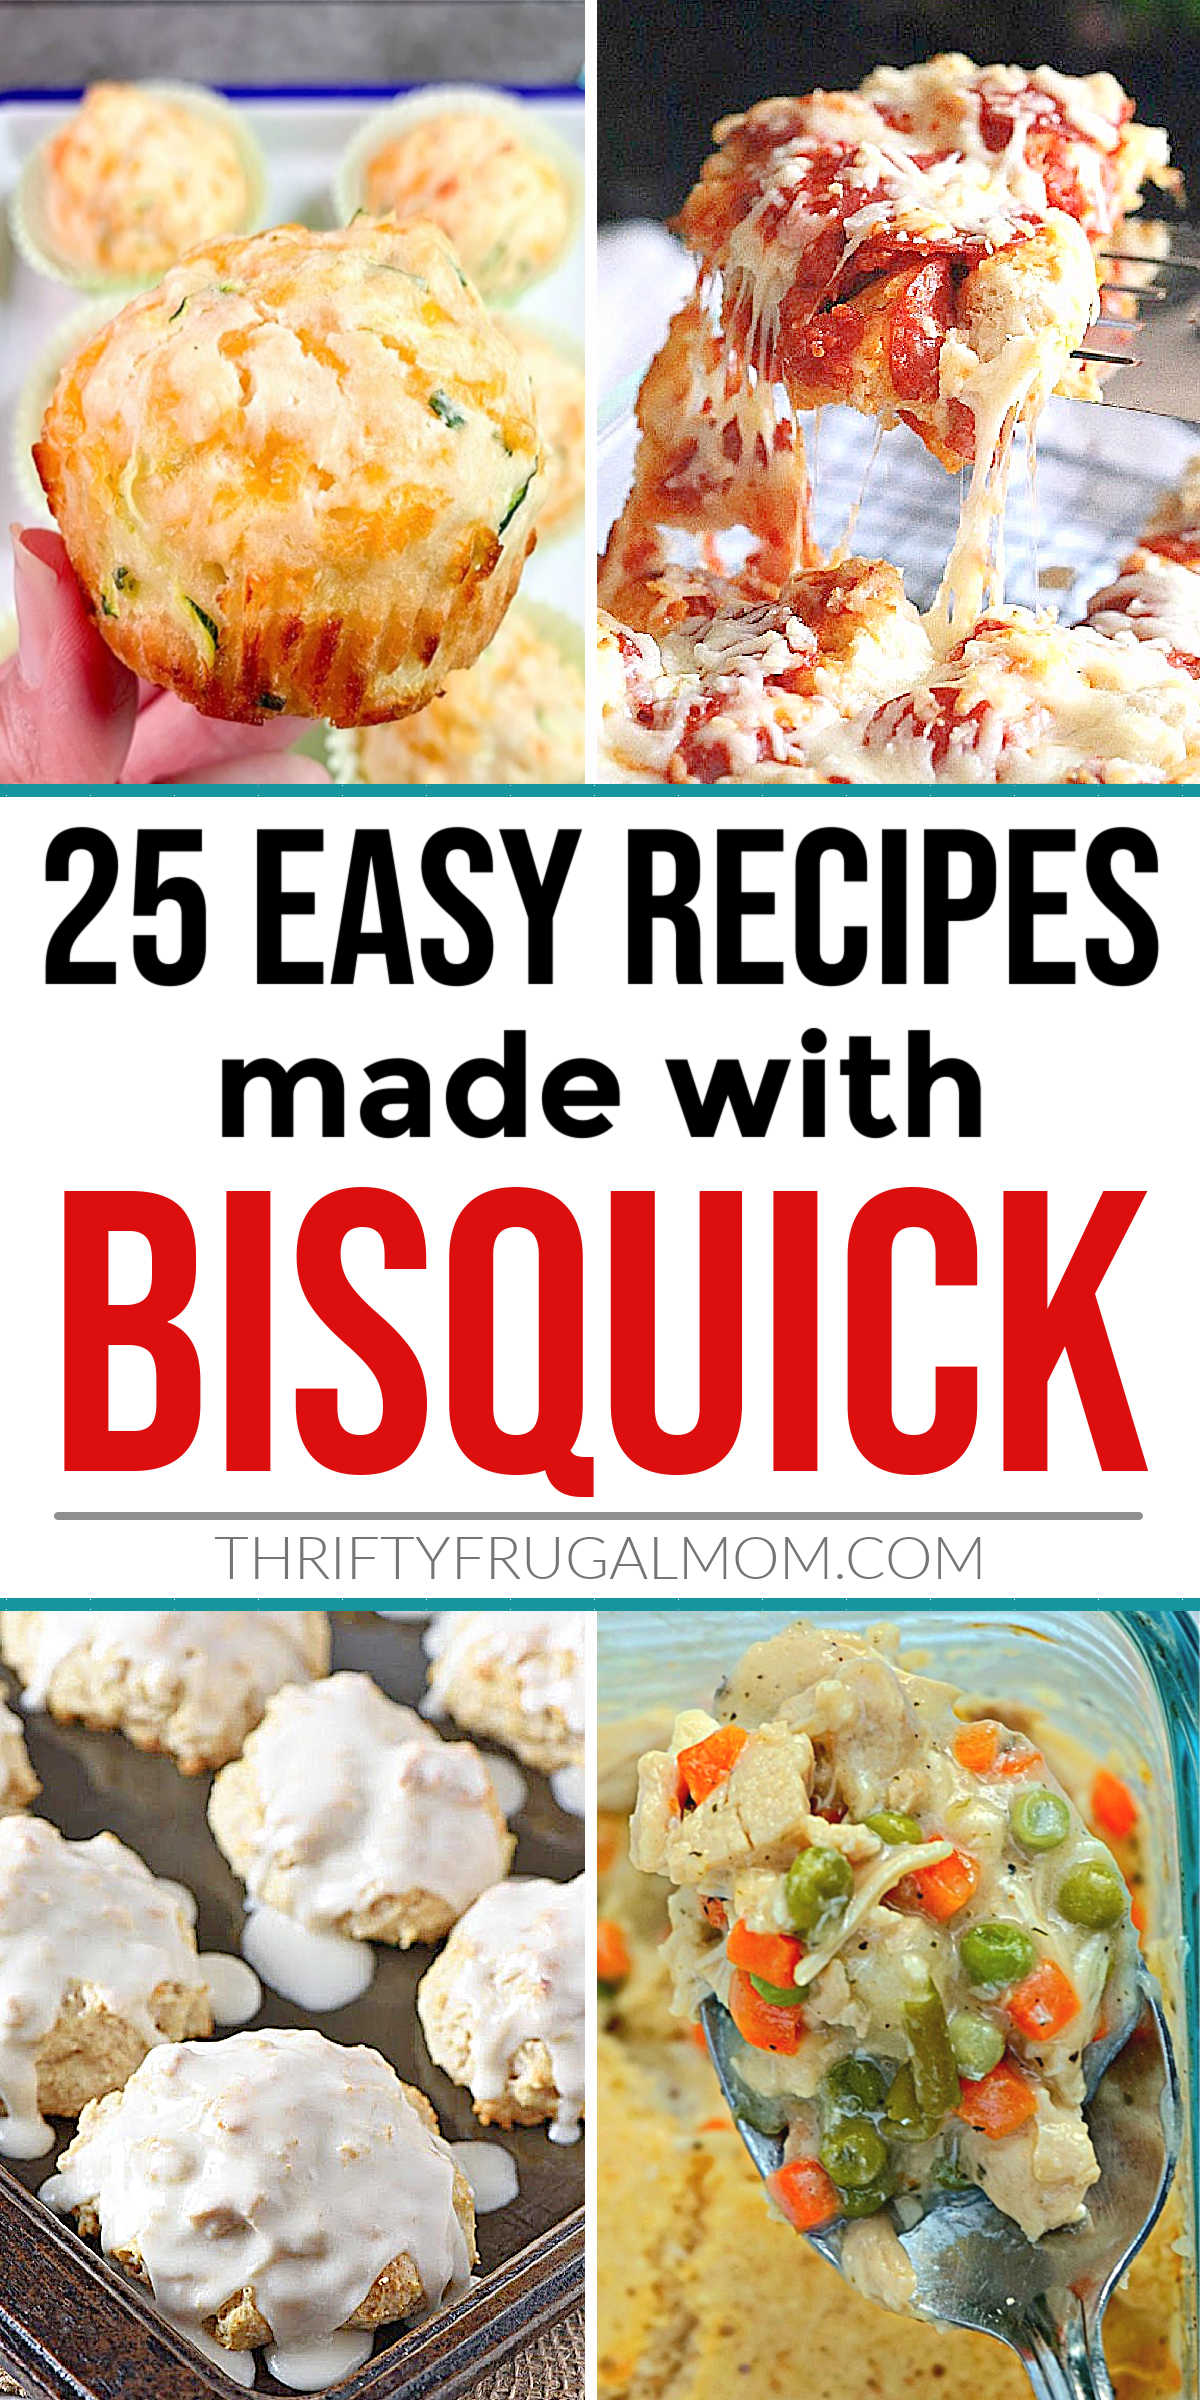 a collage of pictures of recipes made with Bisquick, including chicken pot pie, cheesy muffins and cinnamon biscuits